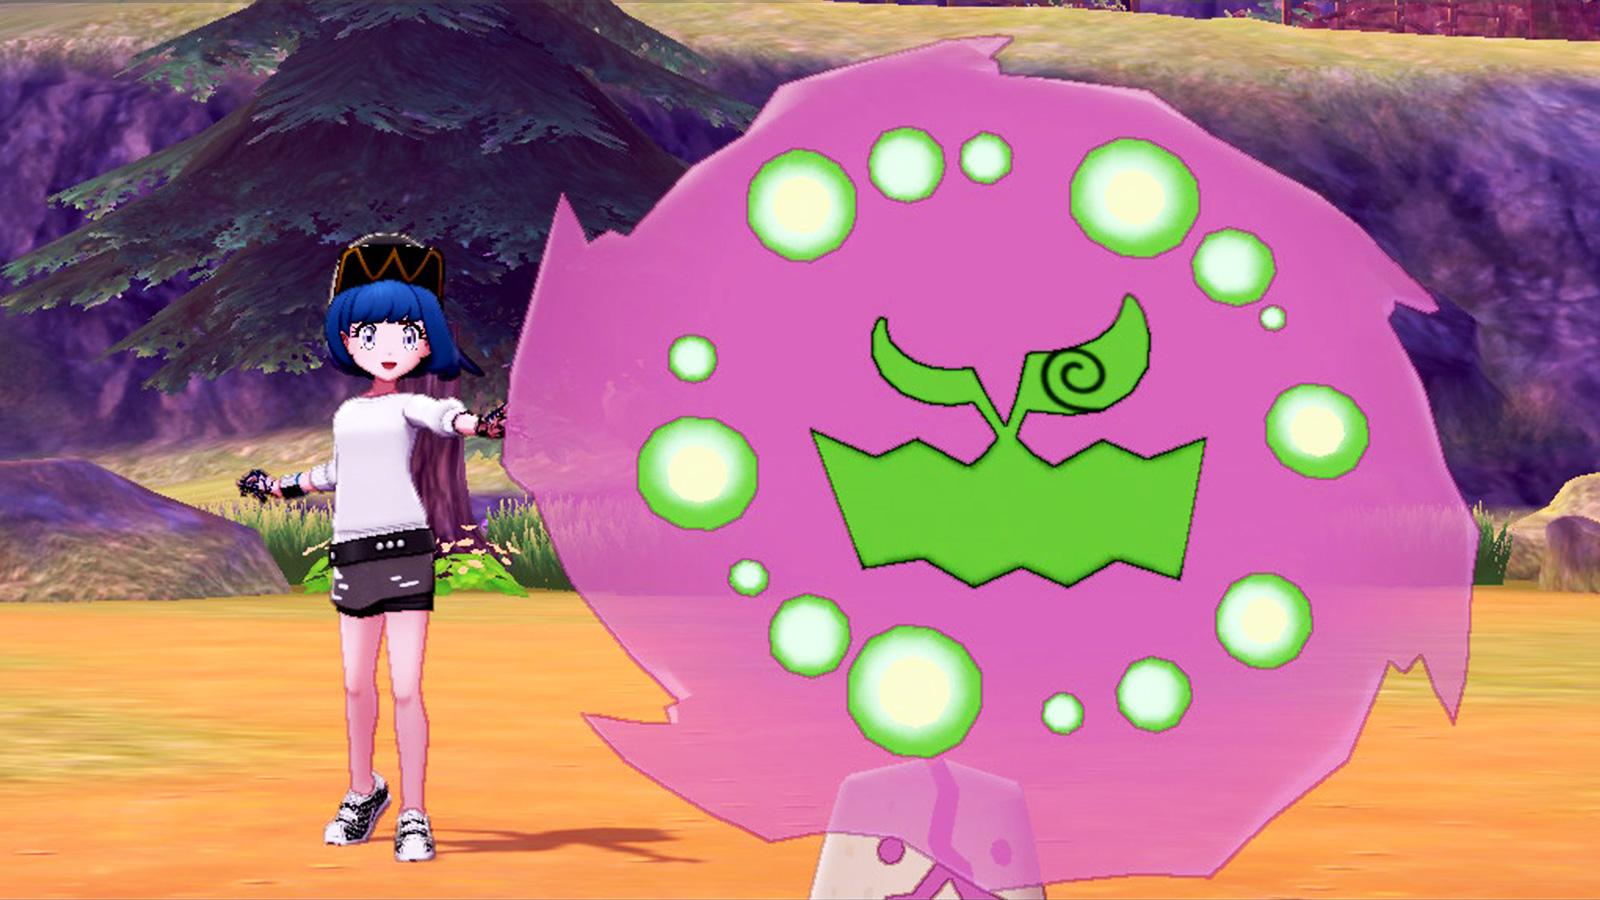 If you've been trying to find Spiritomb in Pokémon Scarlet and Violet